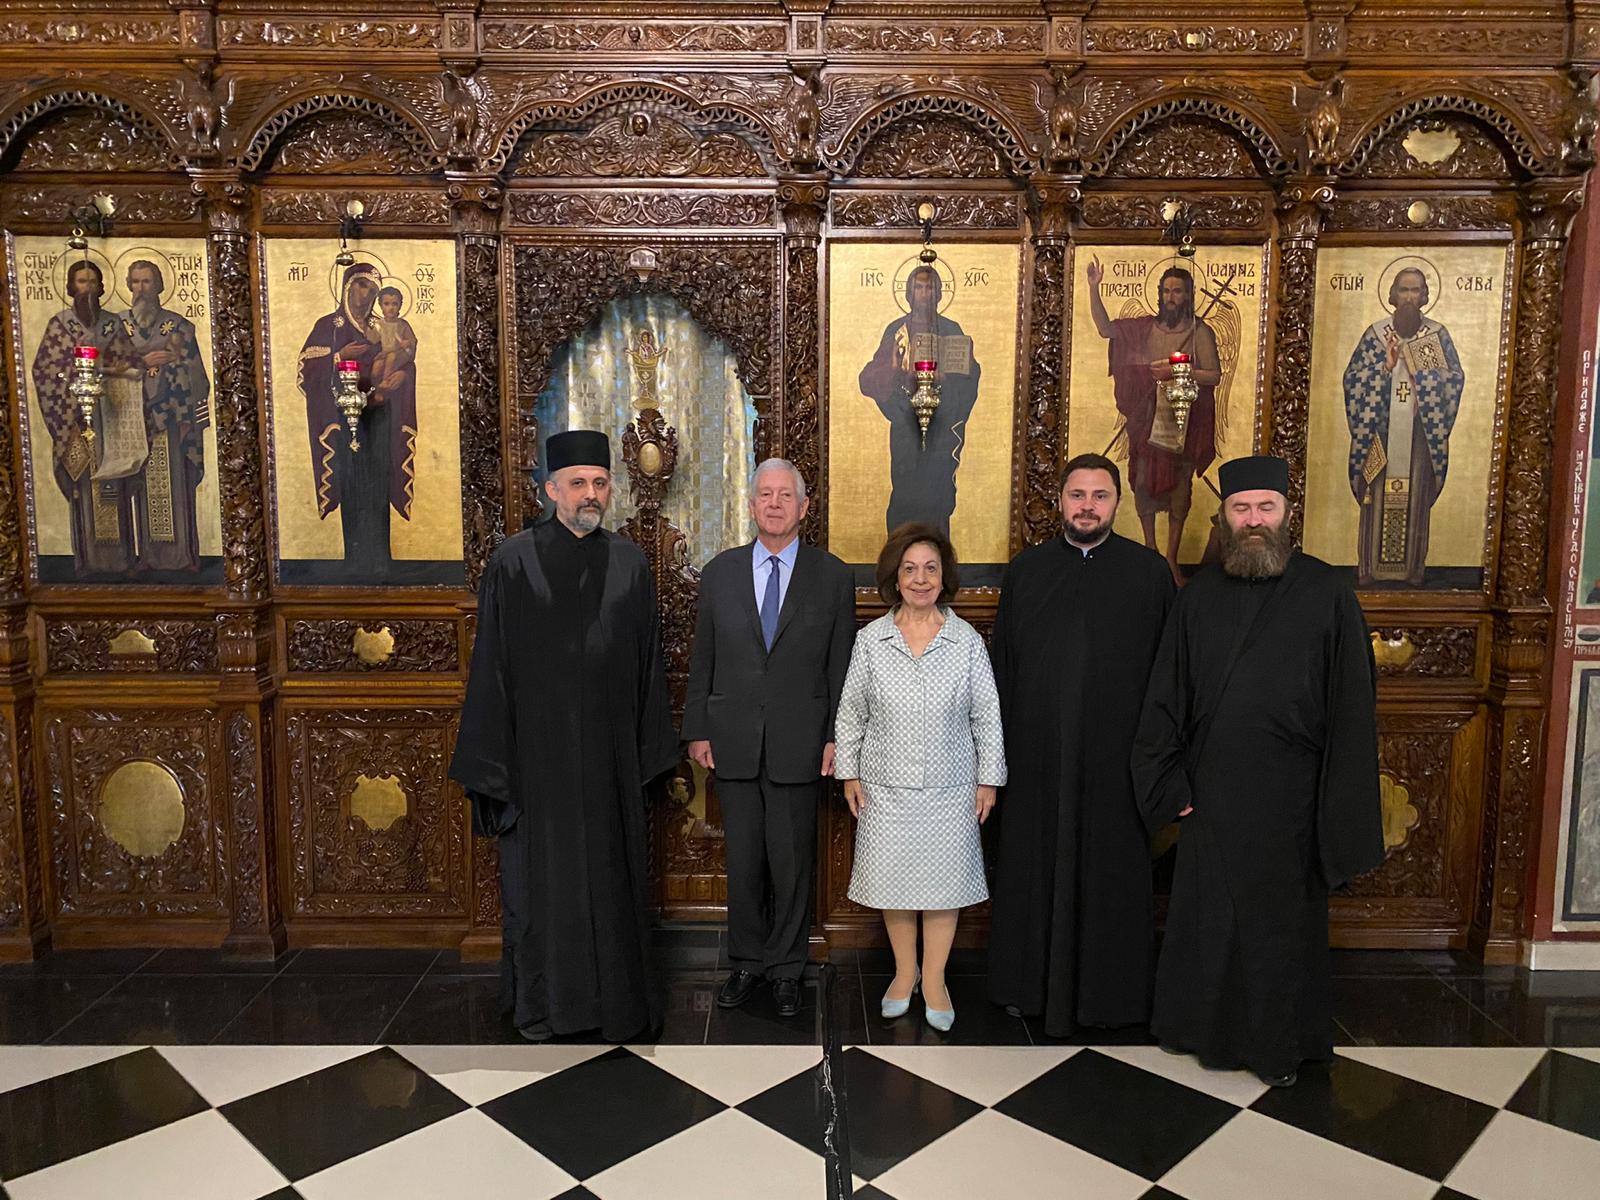 TRH Crown Prince Alexander and Crown Princess Katherine with the clergy at the Church of Saint Cyril and Methodius